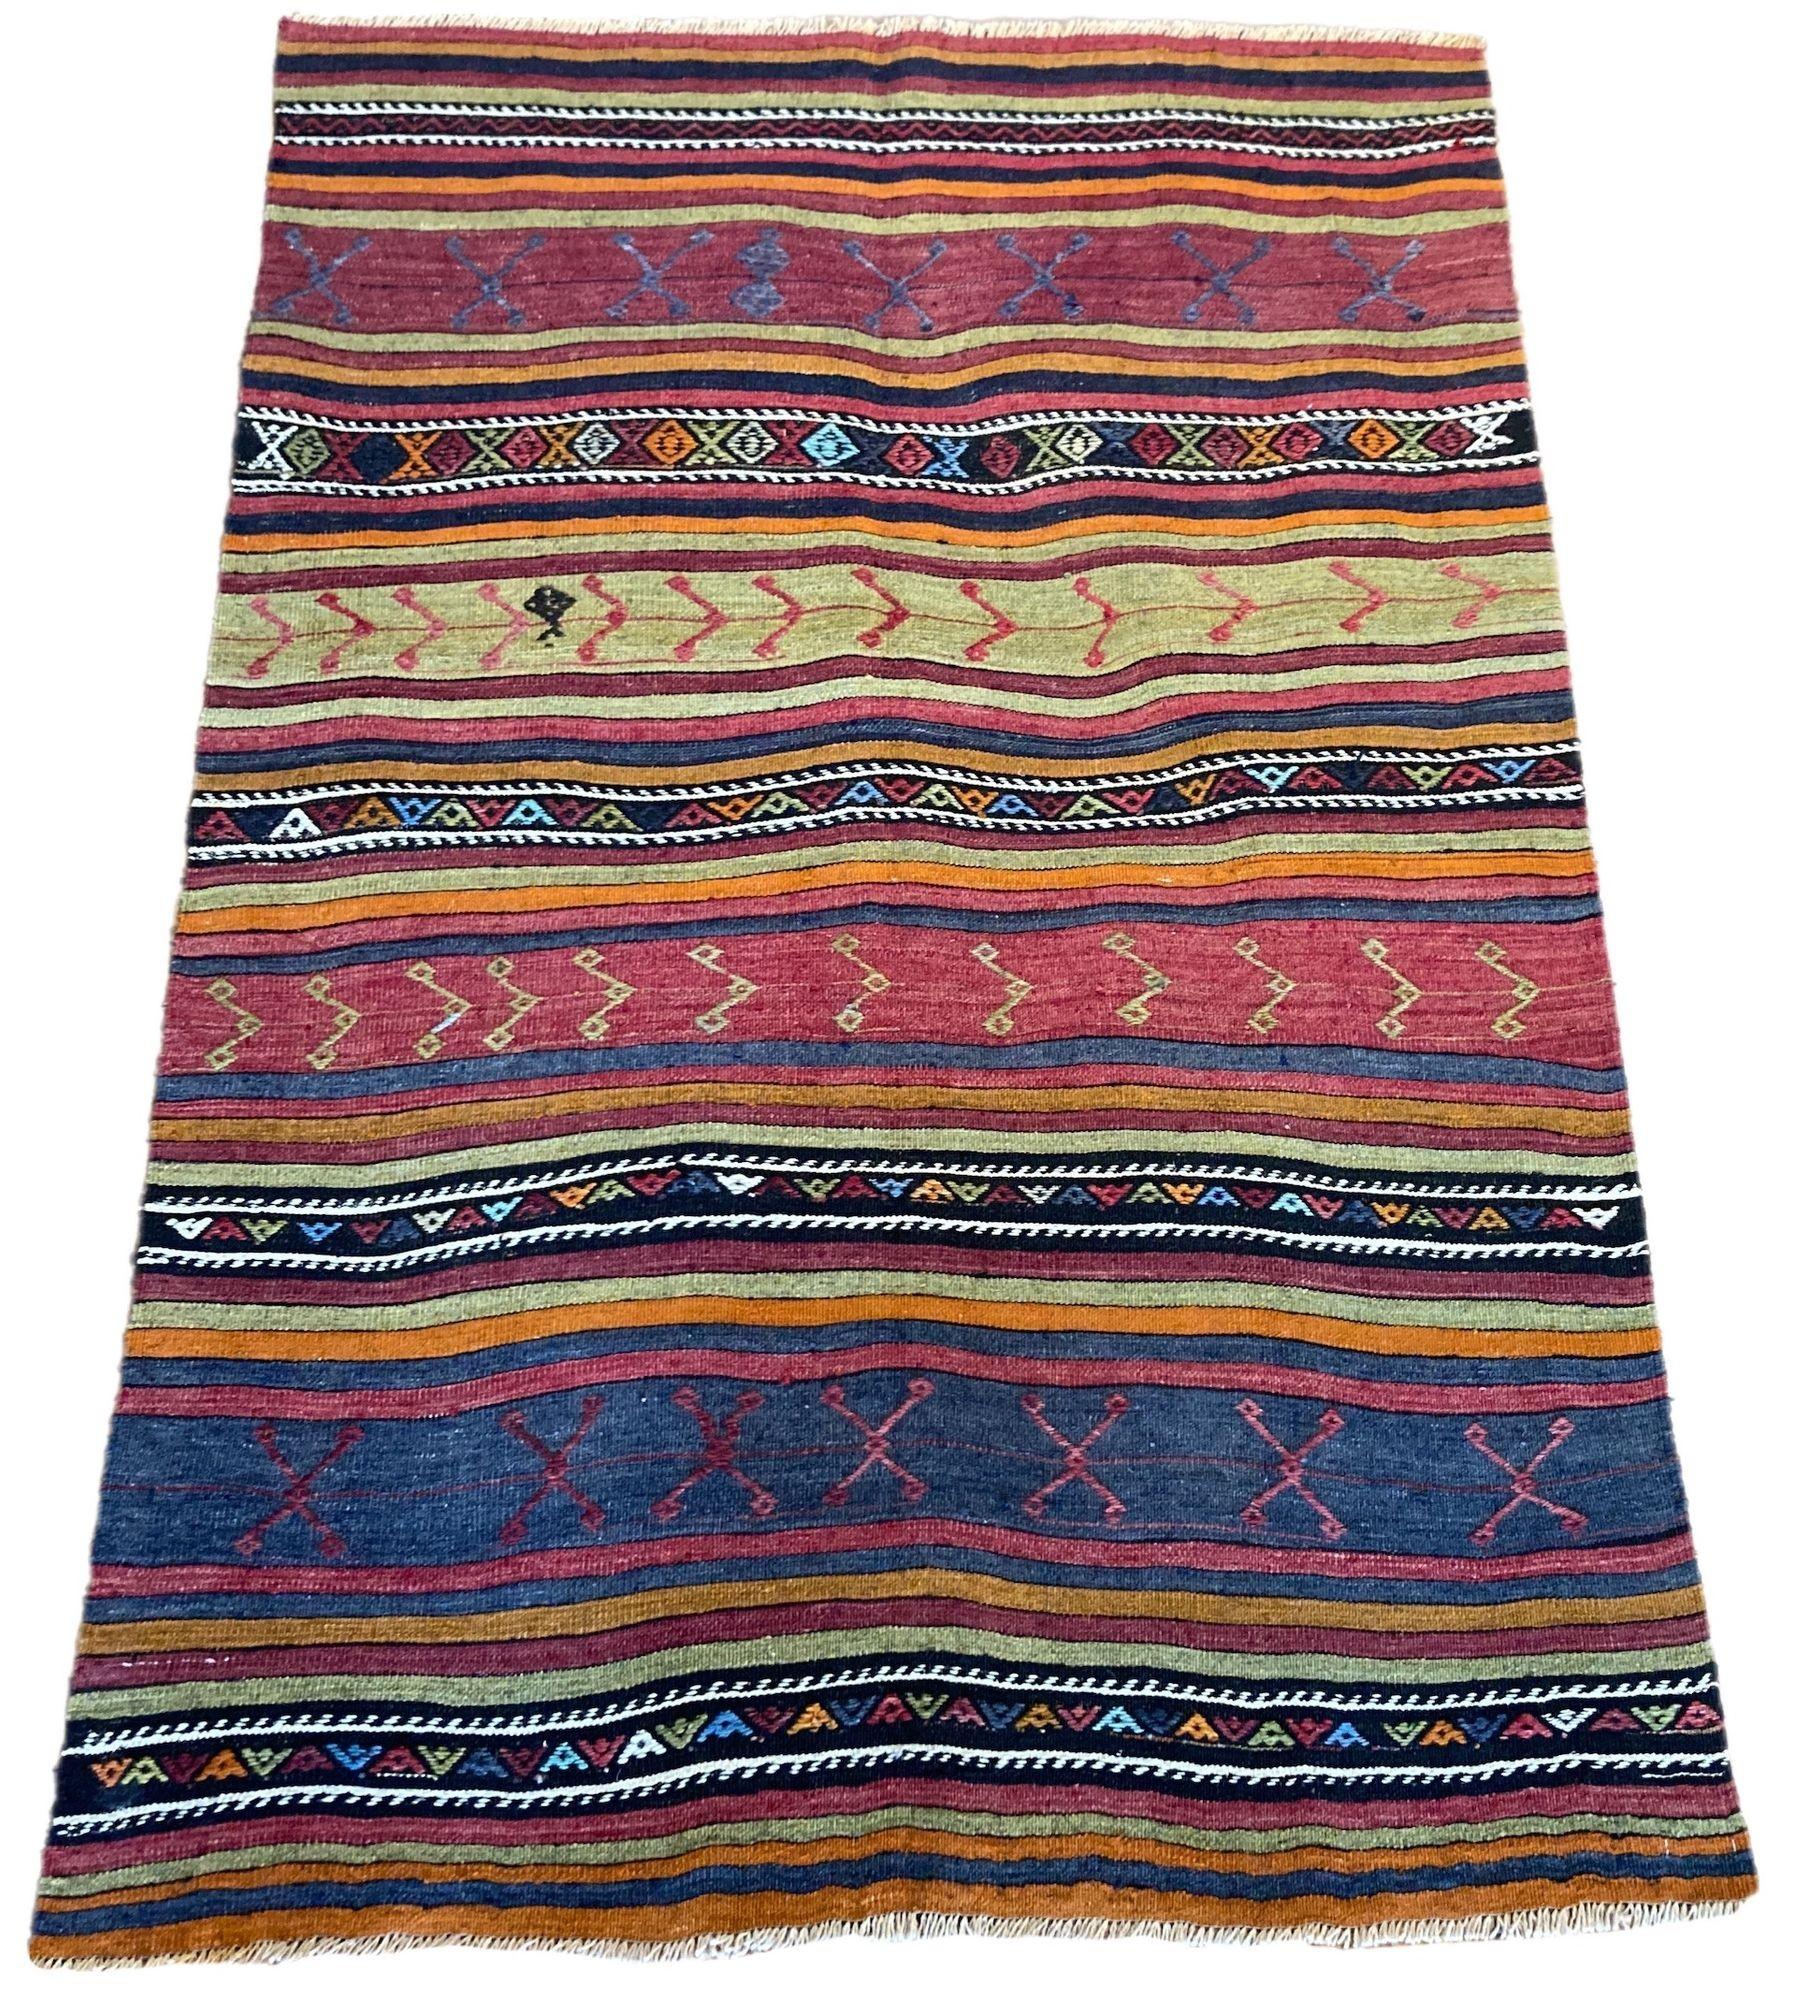 A lovely vintage kilim, handwoven in central Turkey circa 1960 featuring a multicoloured banded design in blues, reds, greens and golds.
Size: 1.97m x 1.33m (6ft 6in x 4ft 4in)
This kilim is in good condition with light, age related wear. The